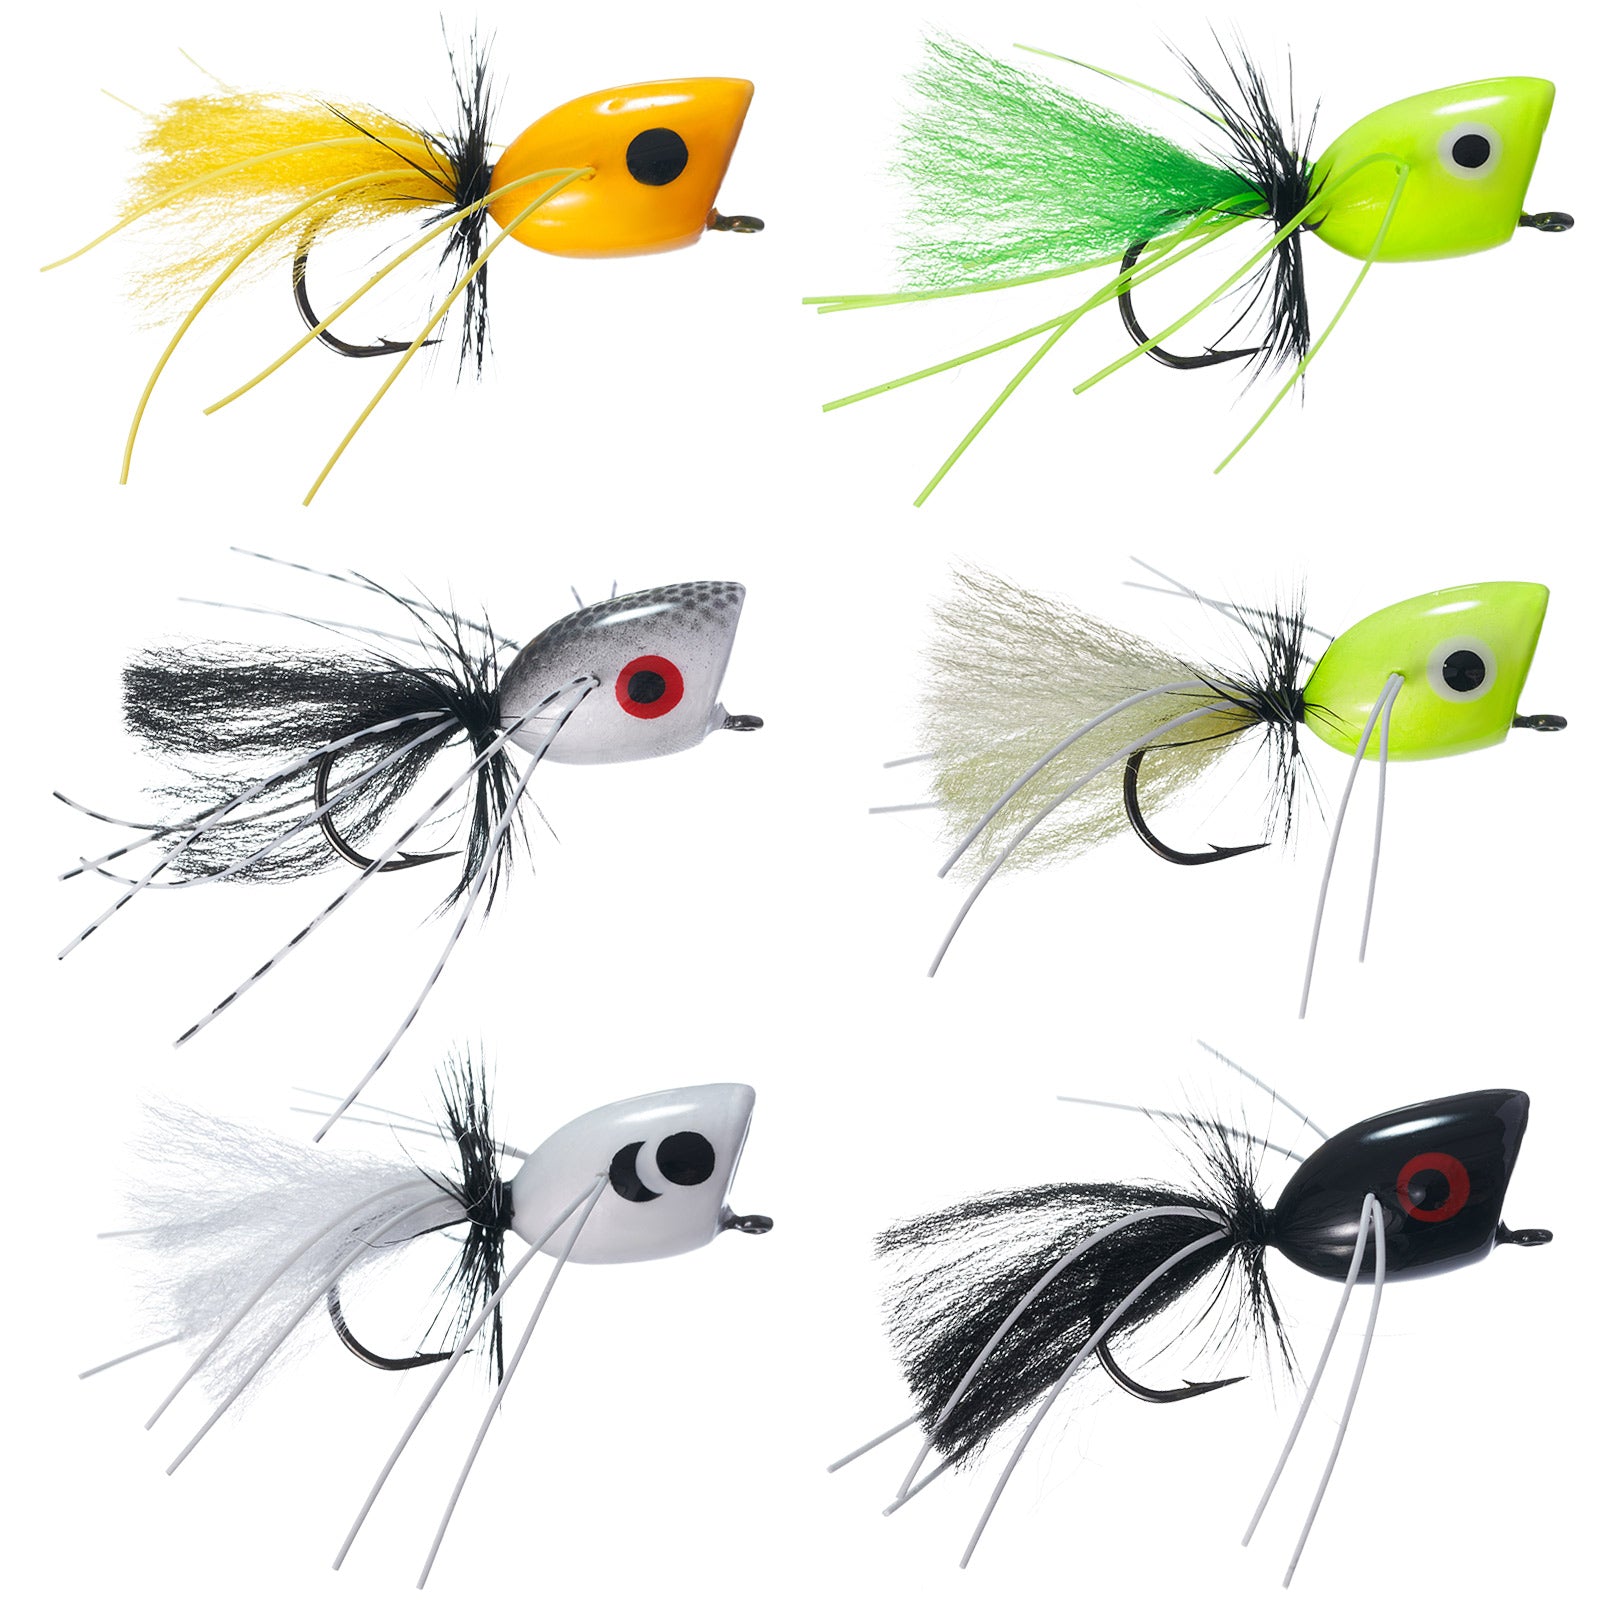  FishingPepo Fly Fishing Poppers, Topwater Fishing Lures Bass  Crappie Bluegill Sunfish Panfish Trout Salmon Perch Steelhead Flies for Fly Fishing  Bass Panfish Bluegill Trout Salmon(10pcs) : Sports & Outdoors